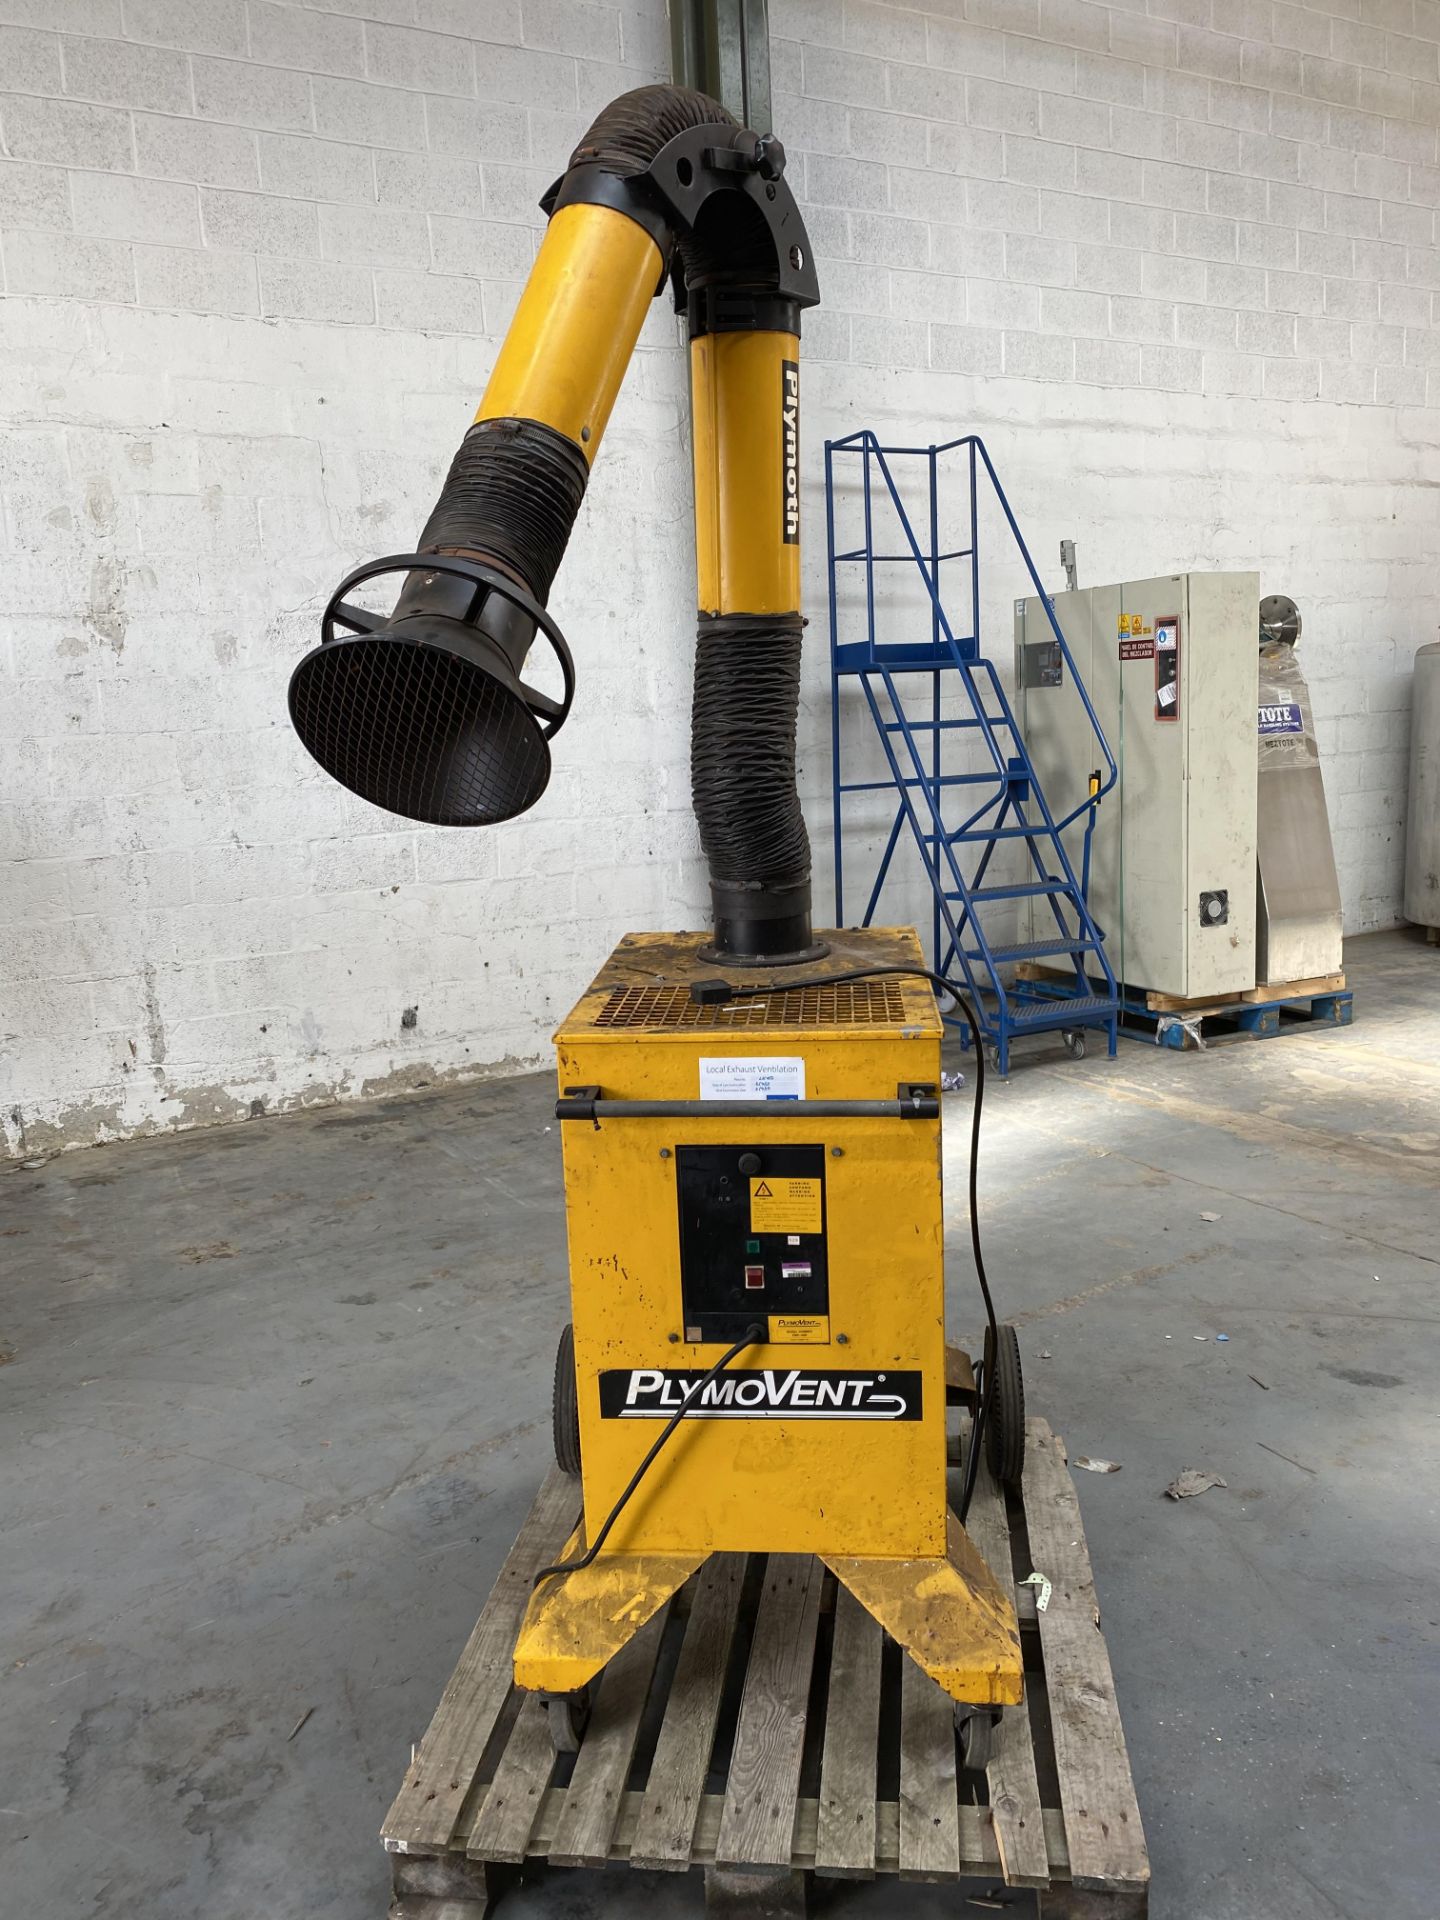 Plymouth EMK 1400 Fume Extractor, loading free of - Image 6 of 6